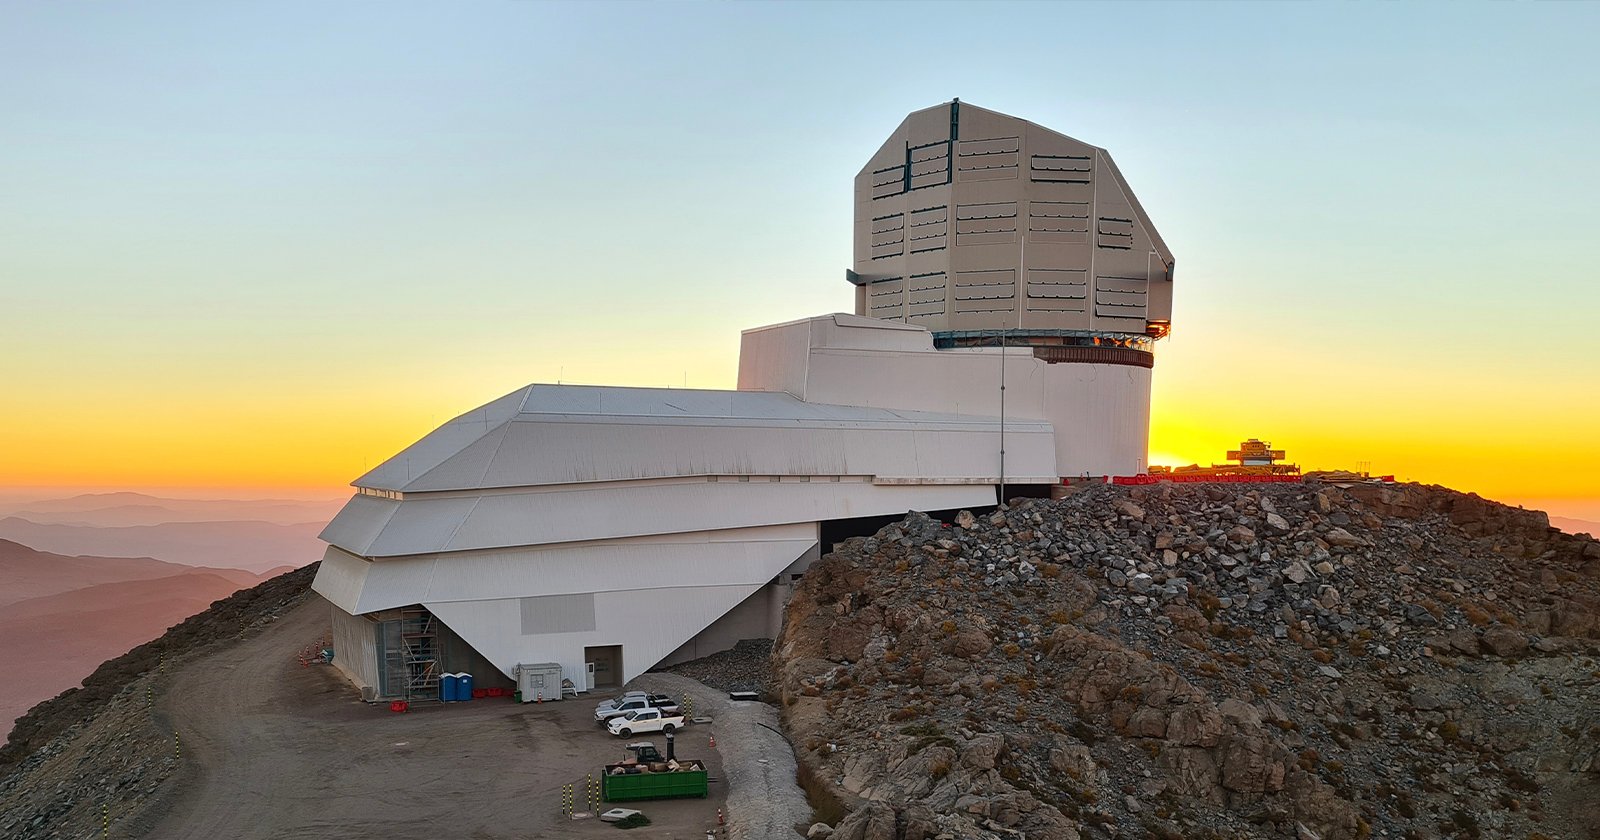 LSST camera in Chile